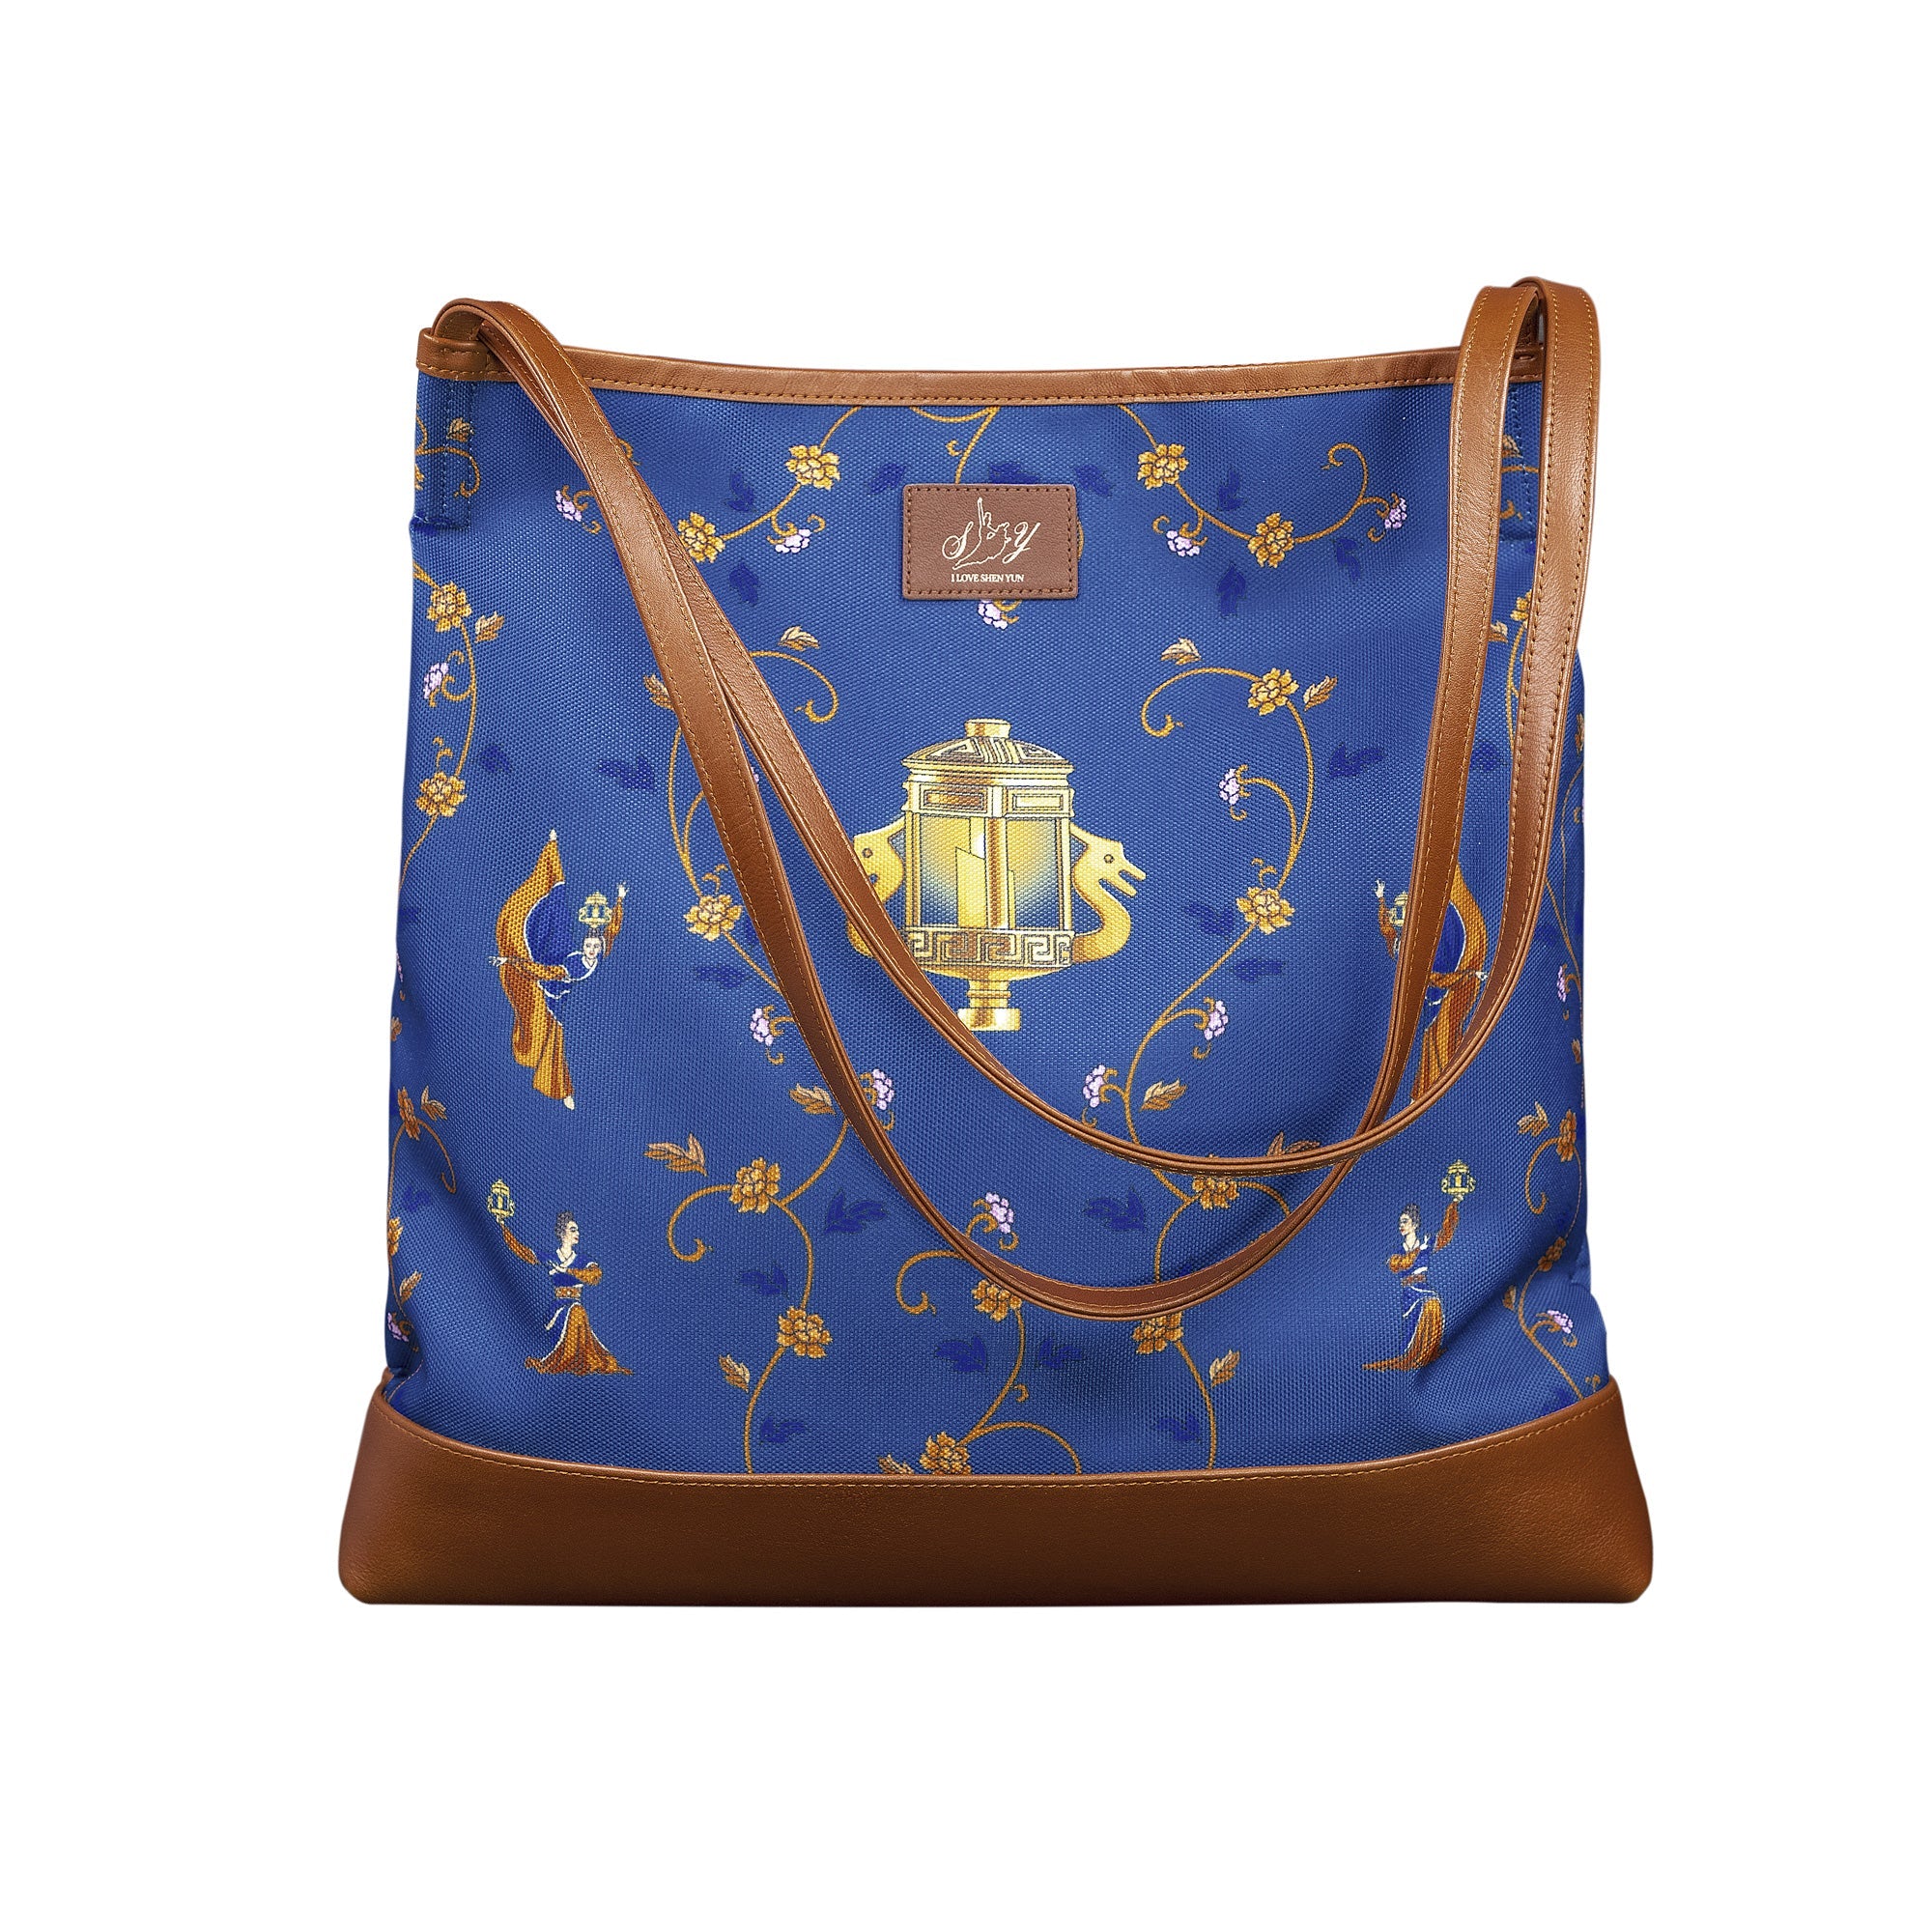 Lantern Grace Tote Bag with Leather Handle Blue Front View | Shen Yun Shop